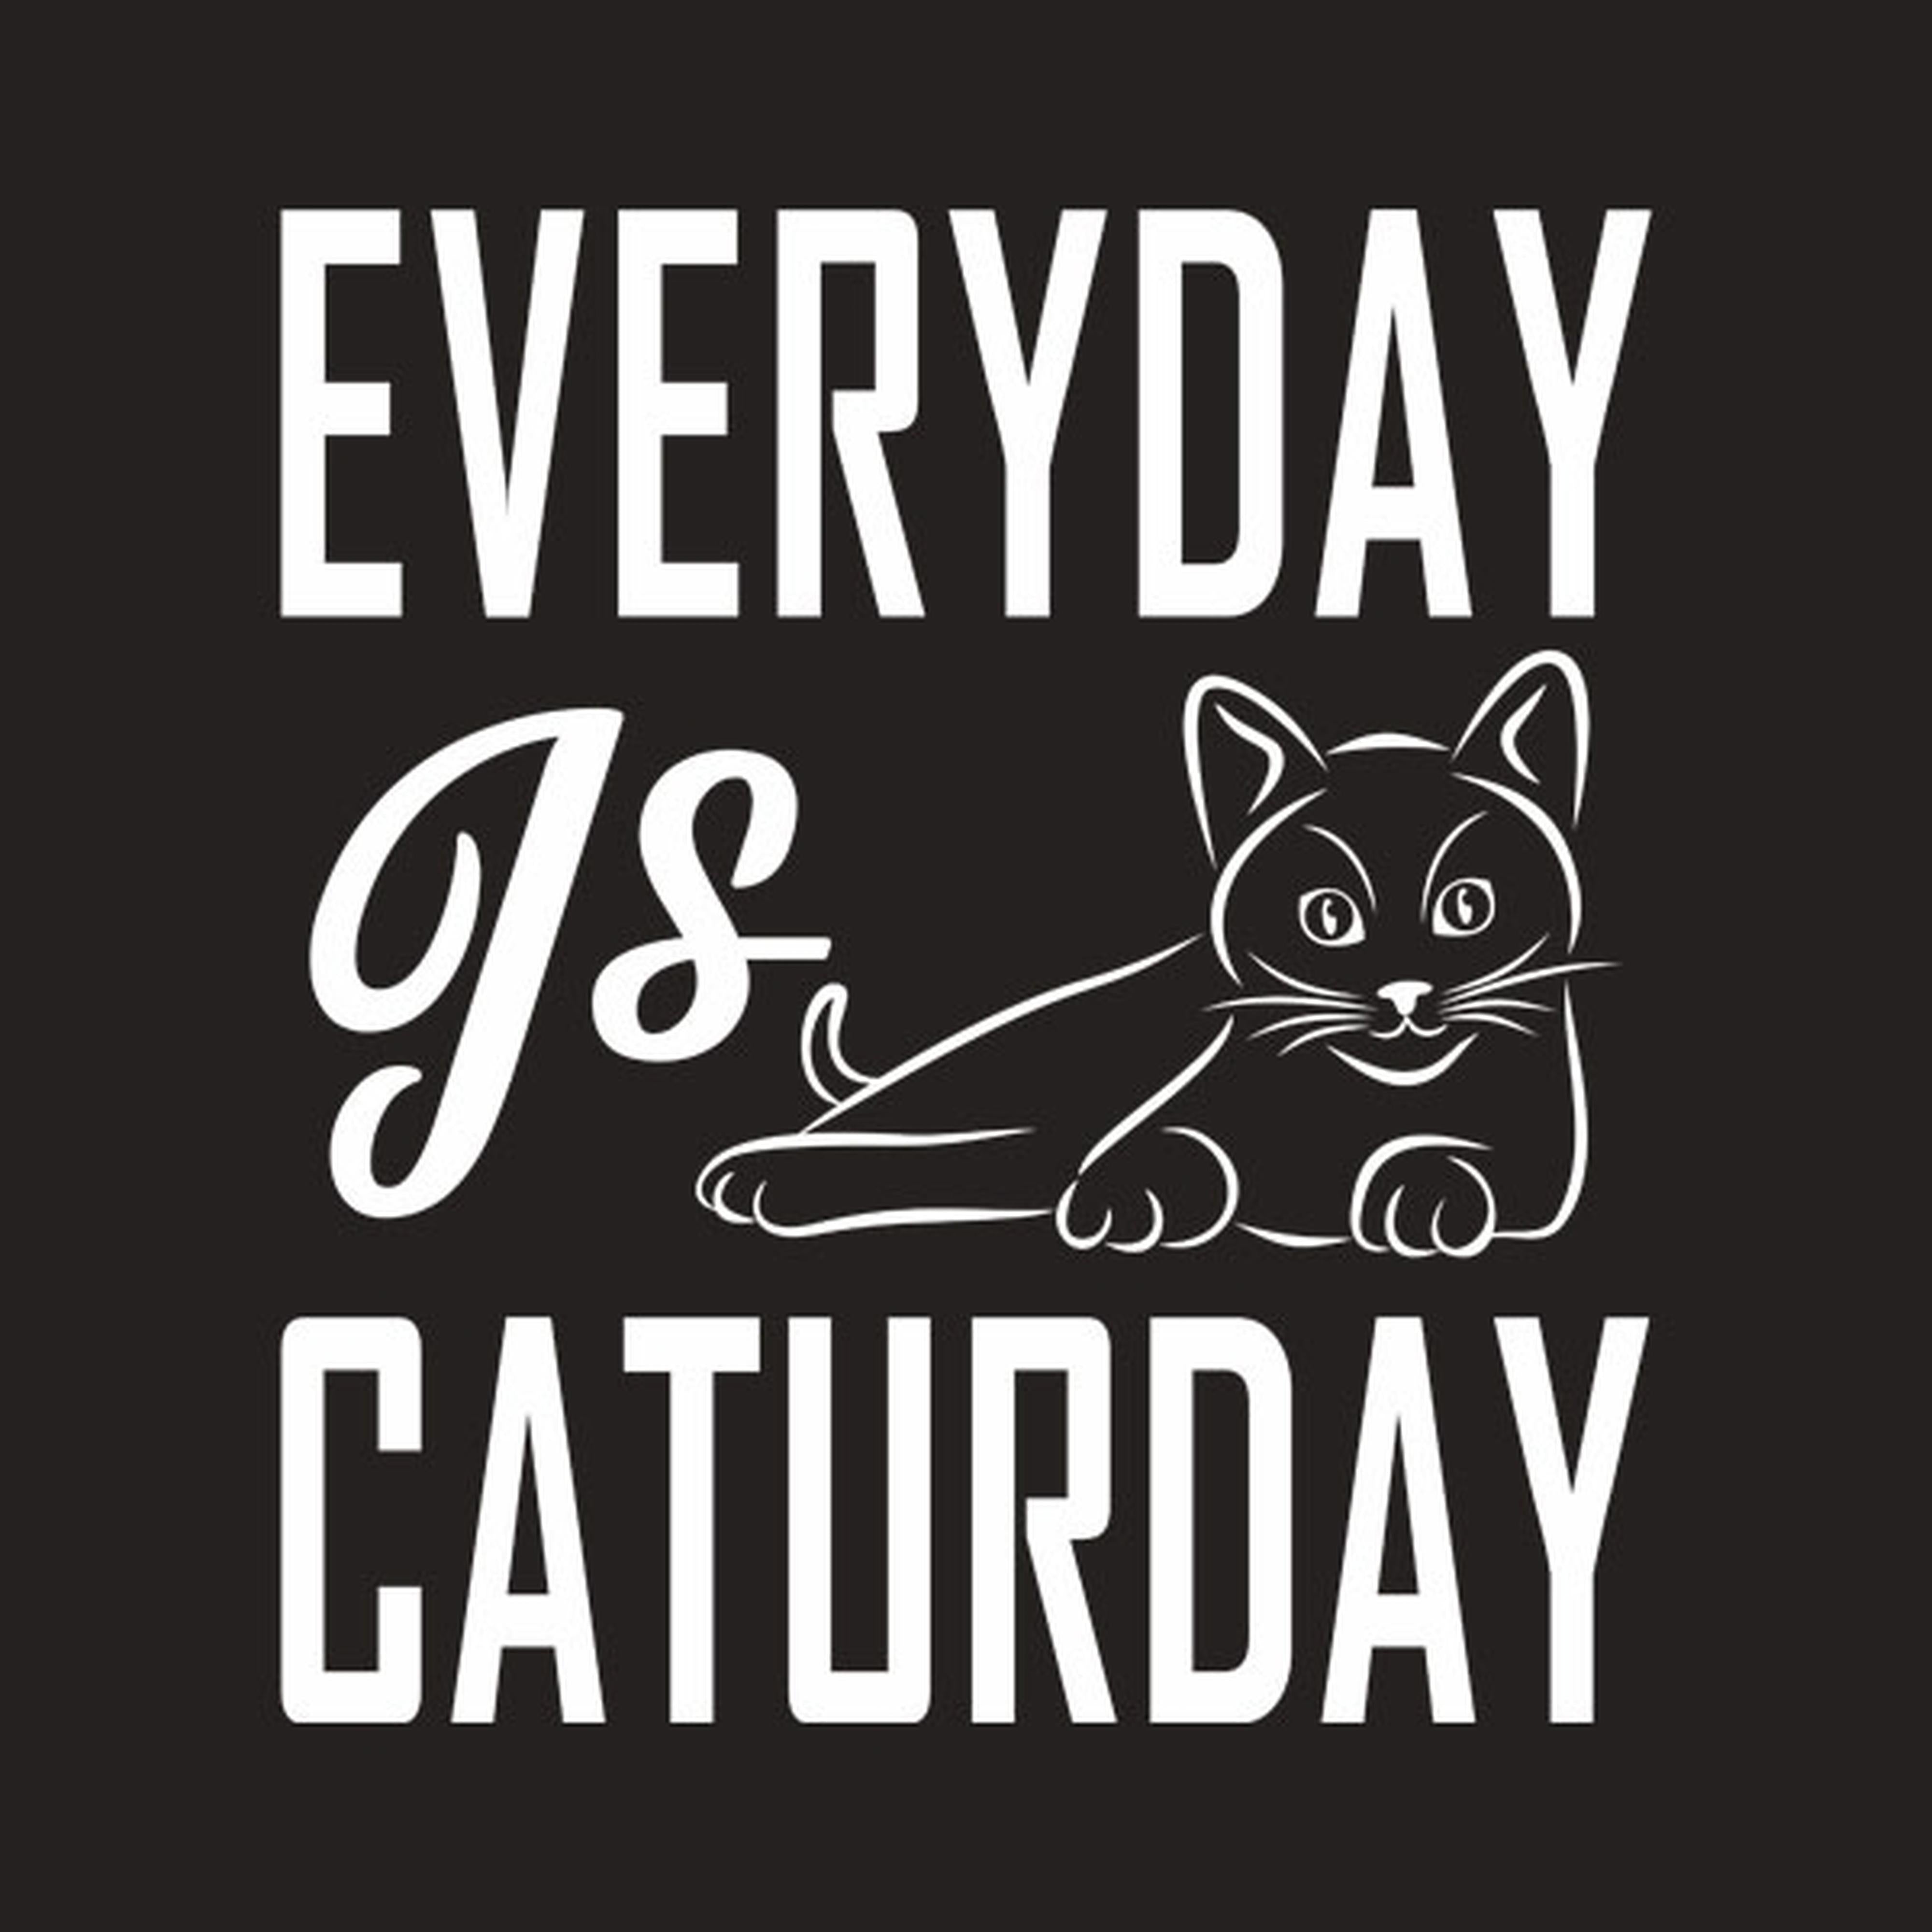 Everyday is Caturday - T-shirt